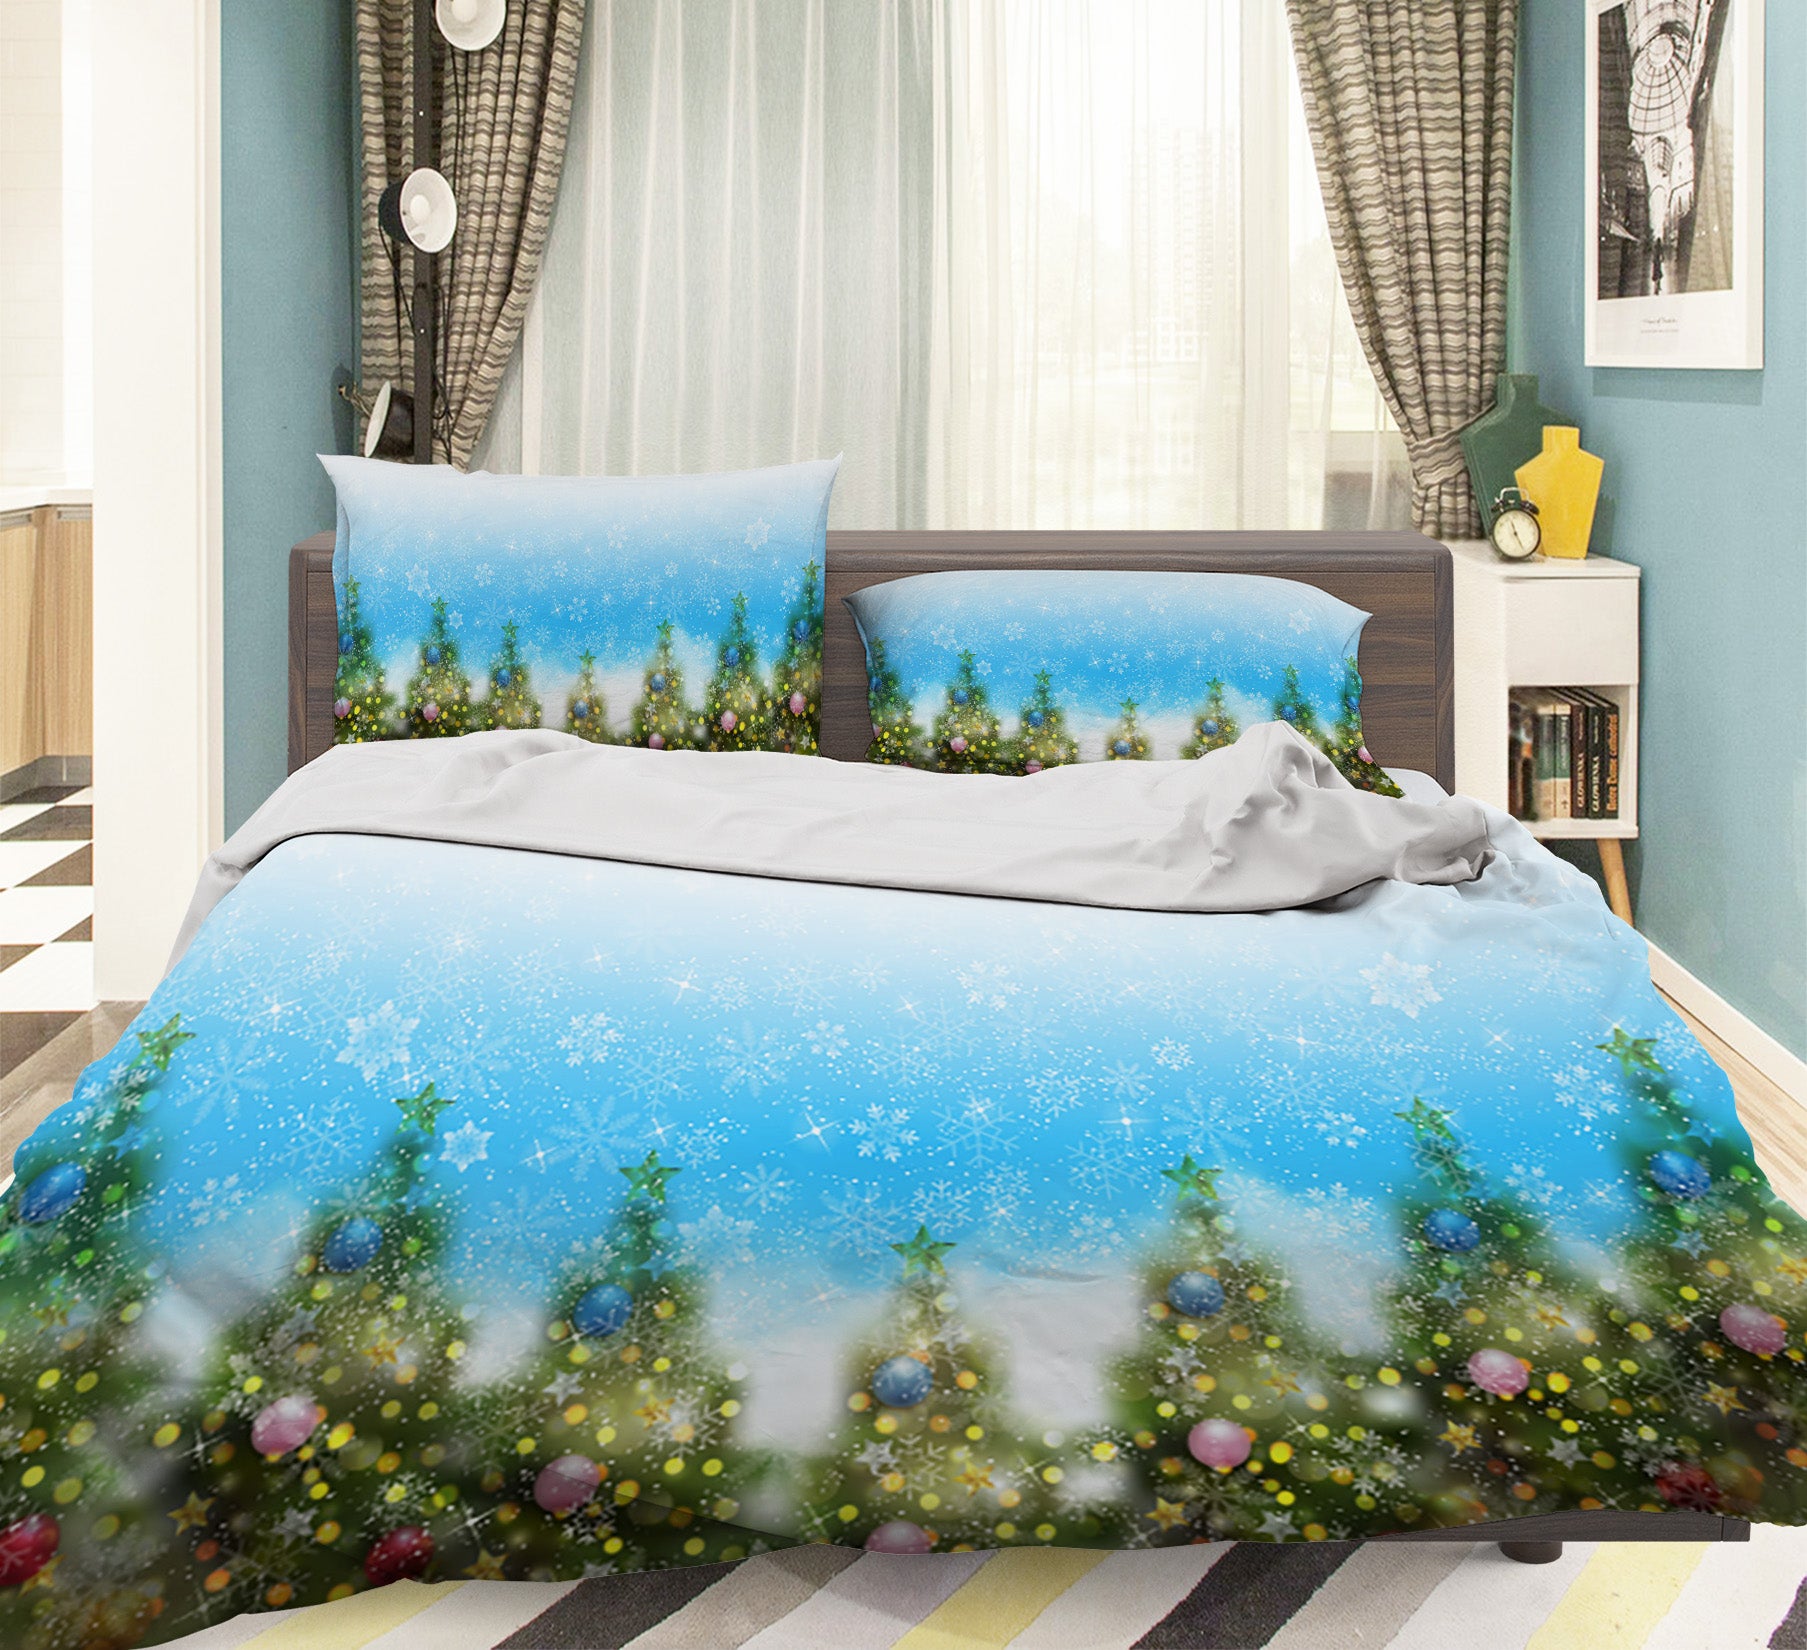 3D Tree Snowflake Colored Balls 53018 Christmas Quilt Duvet Cover Xmas Bed Pillowcases